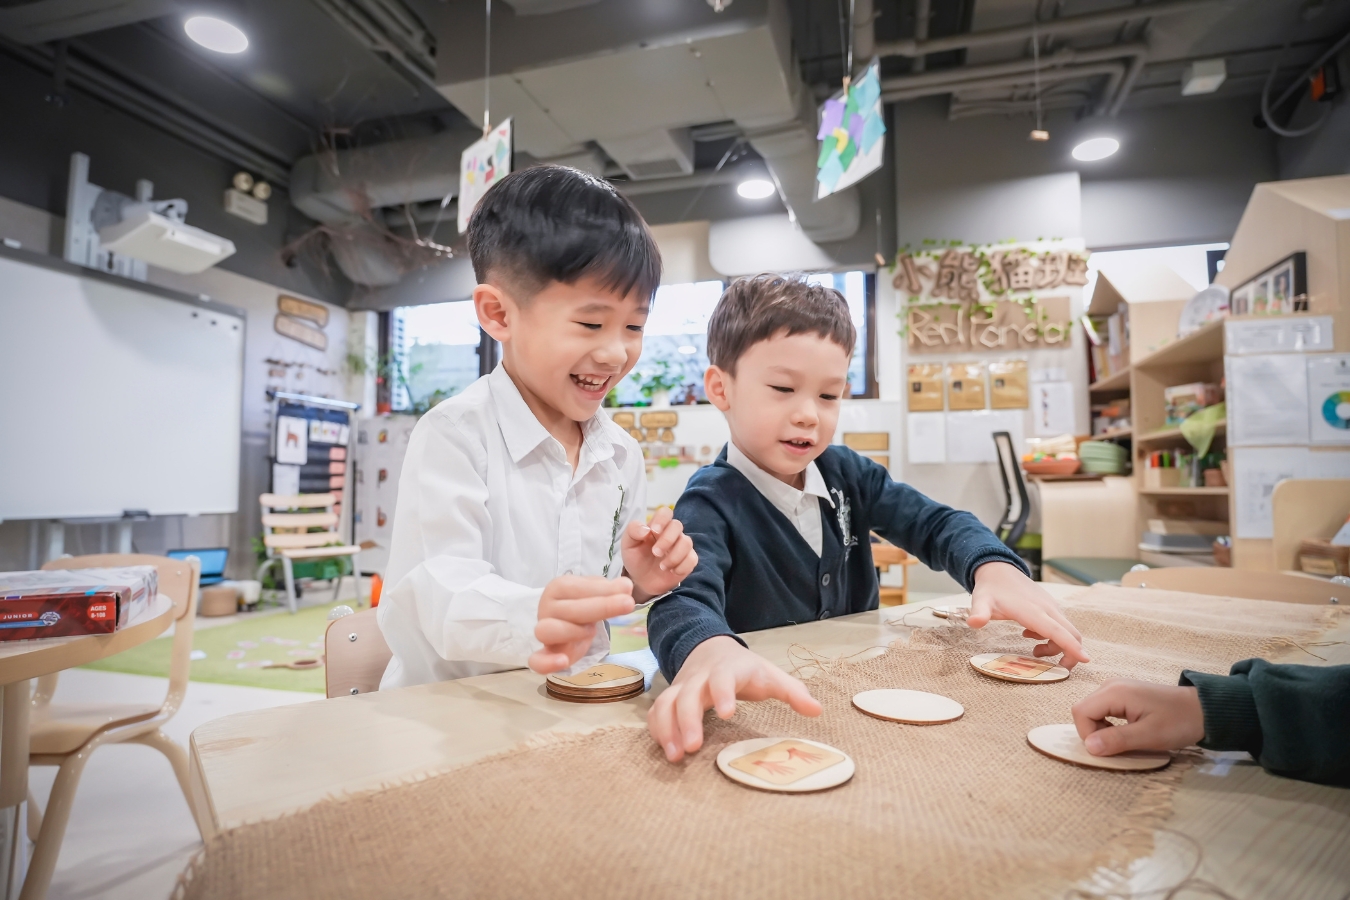 malvern college pre-school students hands-on learning